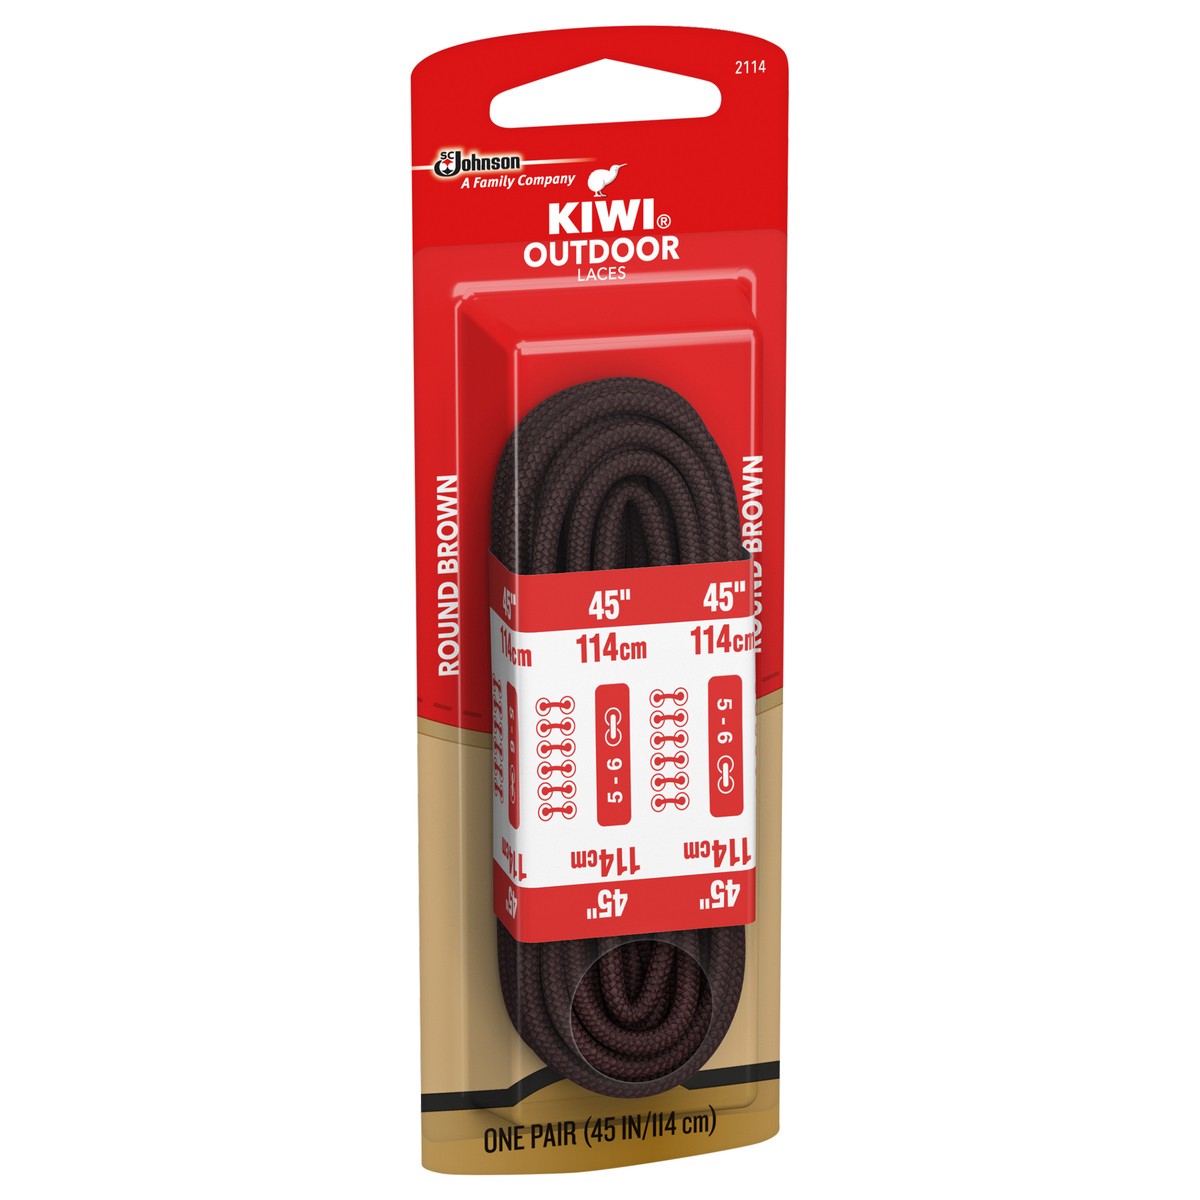 slide 2 of 7, KIWI Outdoor Round Laces, Brown, 45 in, 1 pair, 1 ct